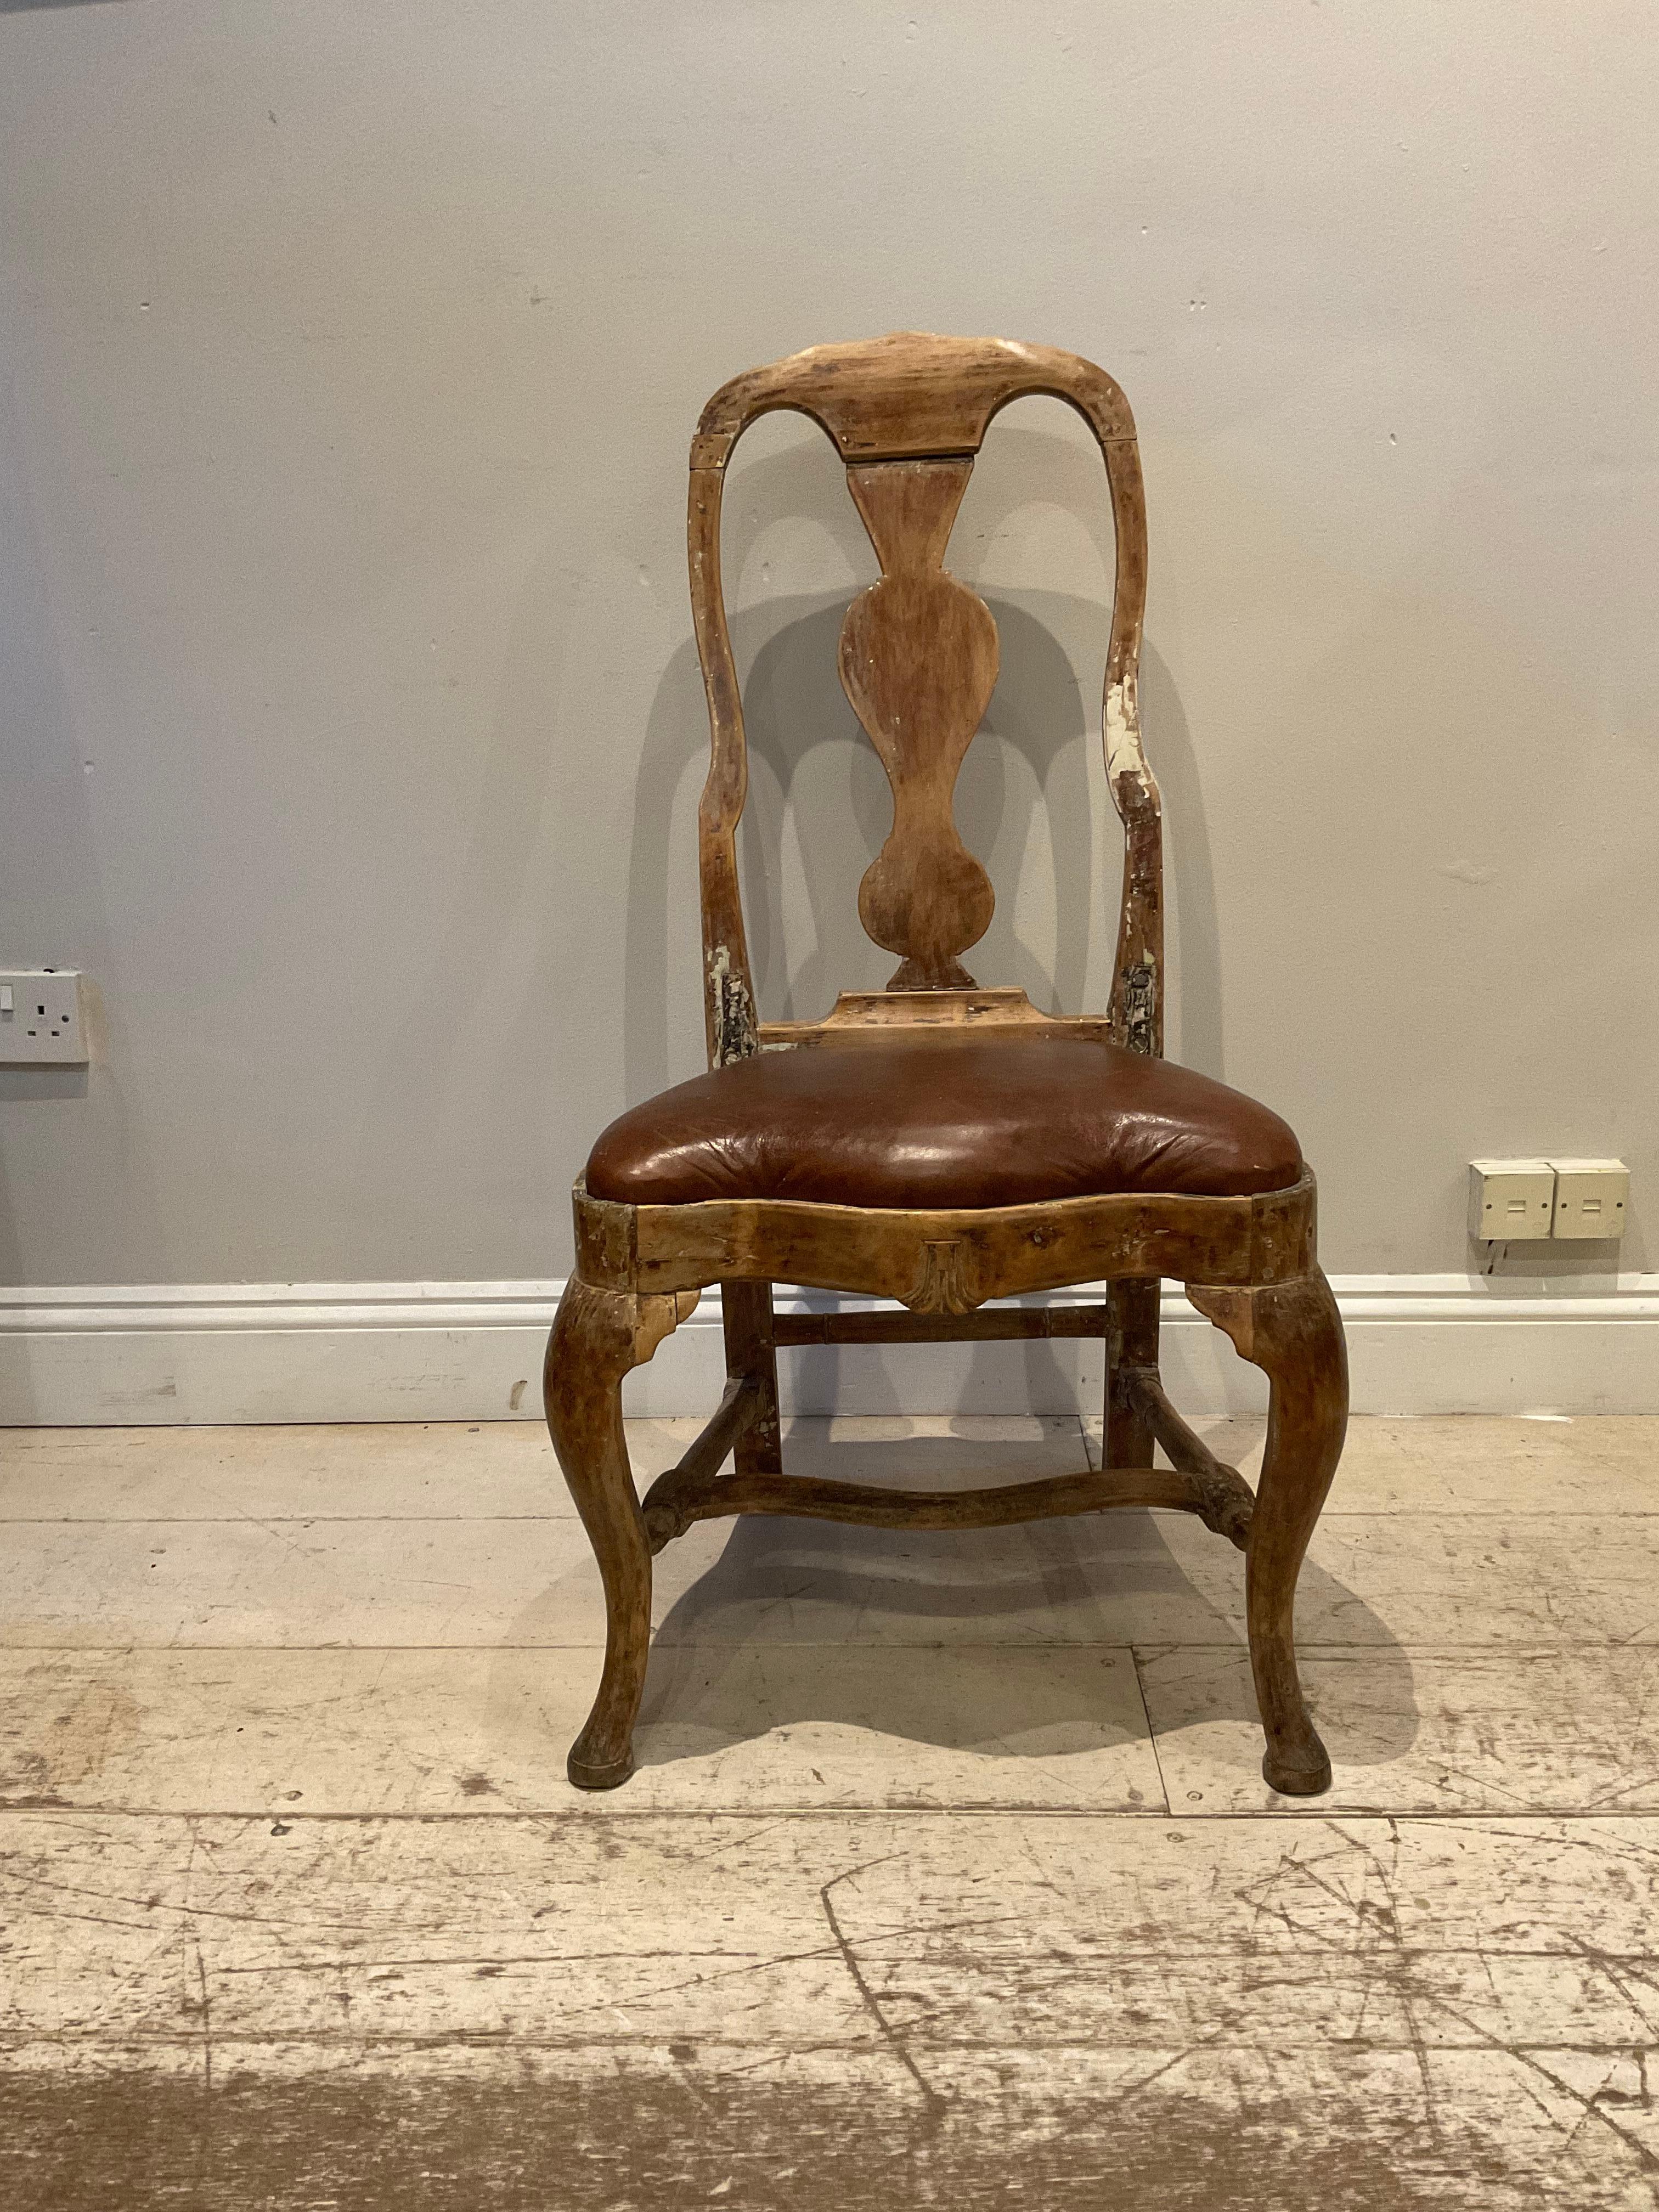 Rococo Late 18th Century High Backed Swedish Chair with Leather Seat For Sale